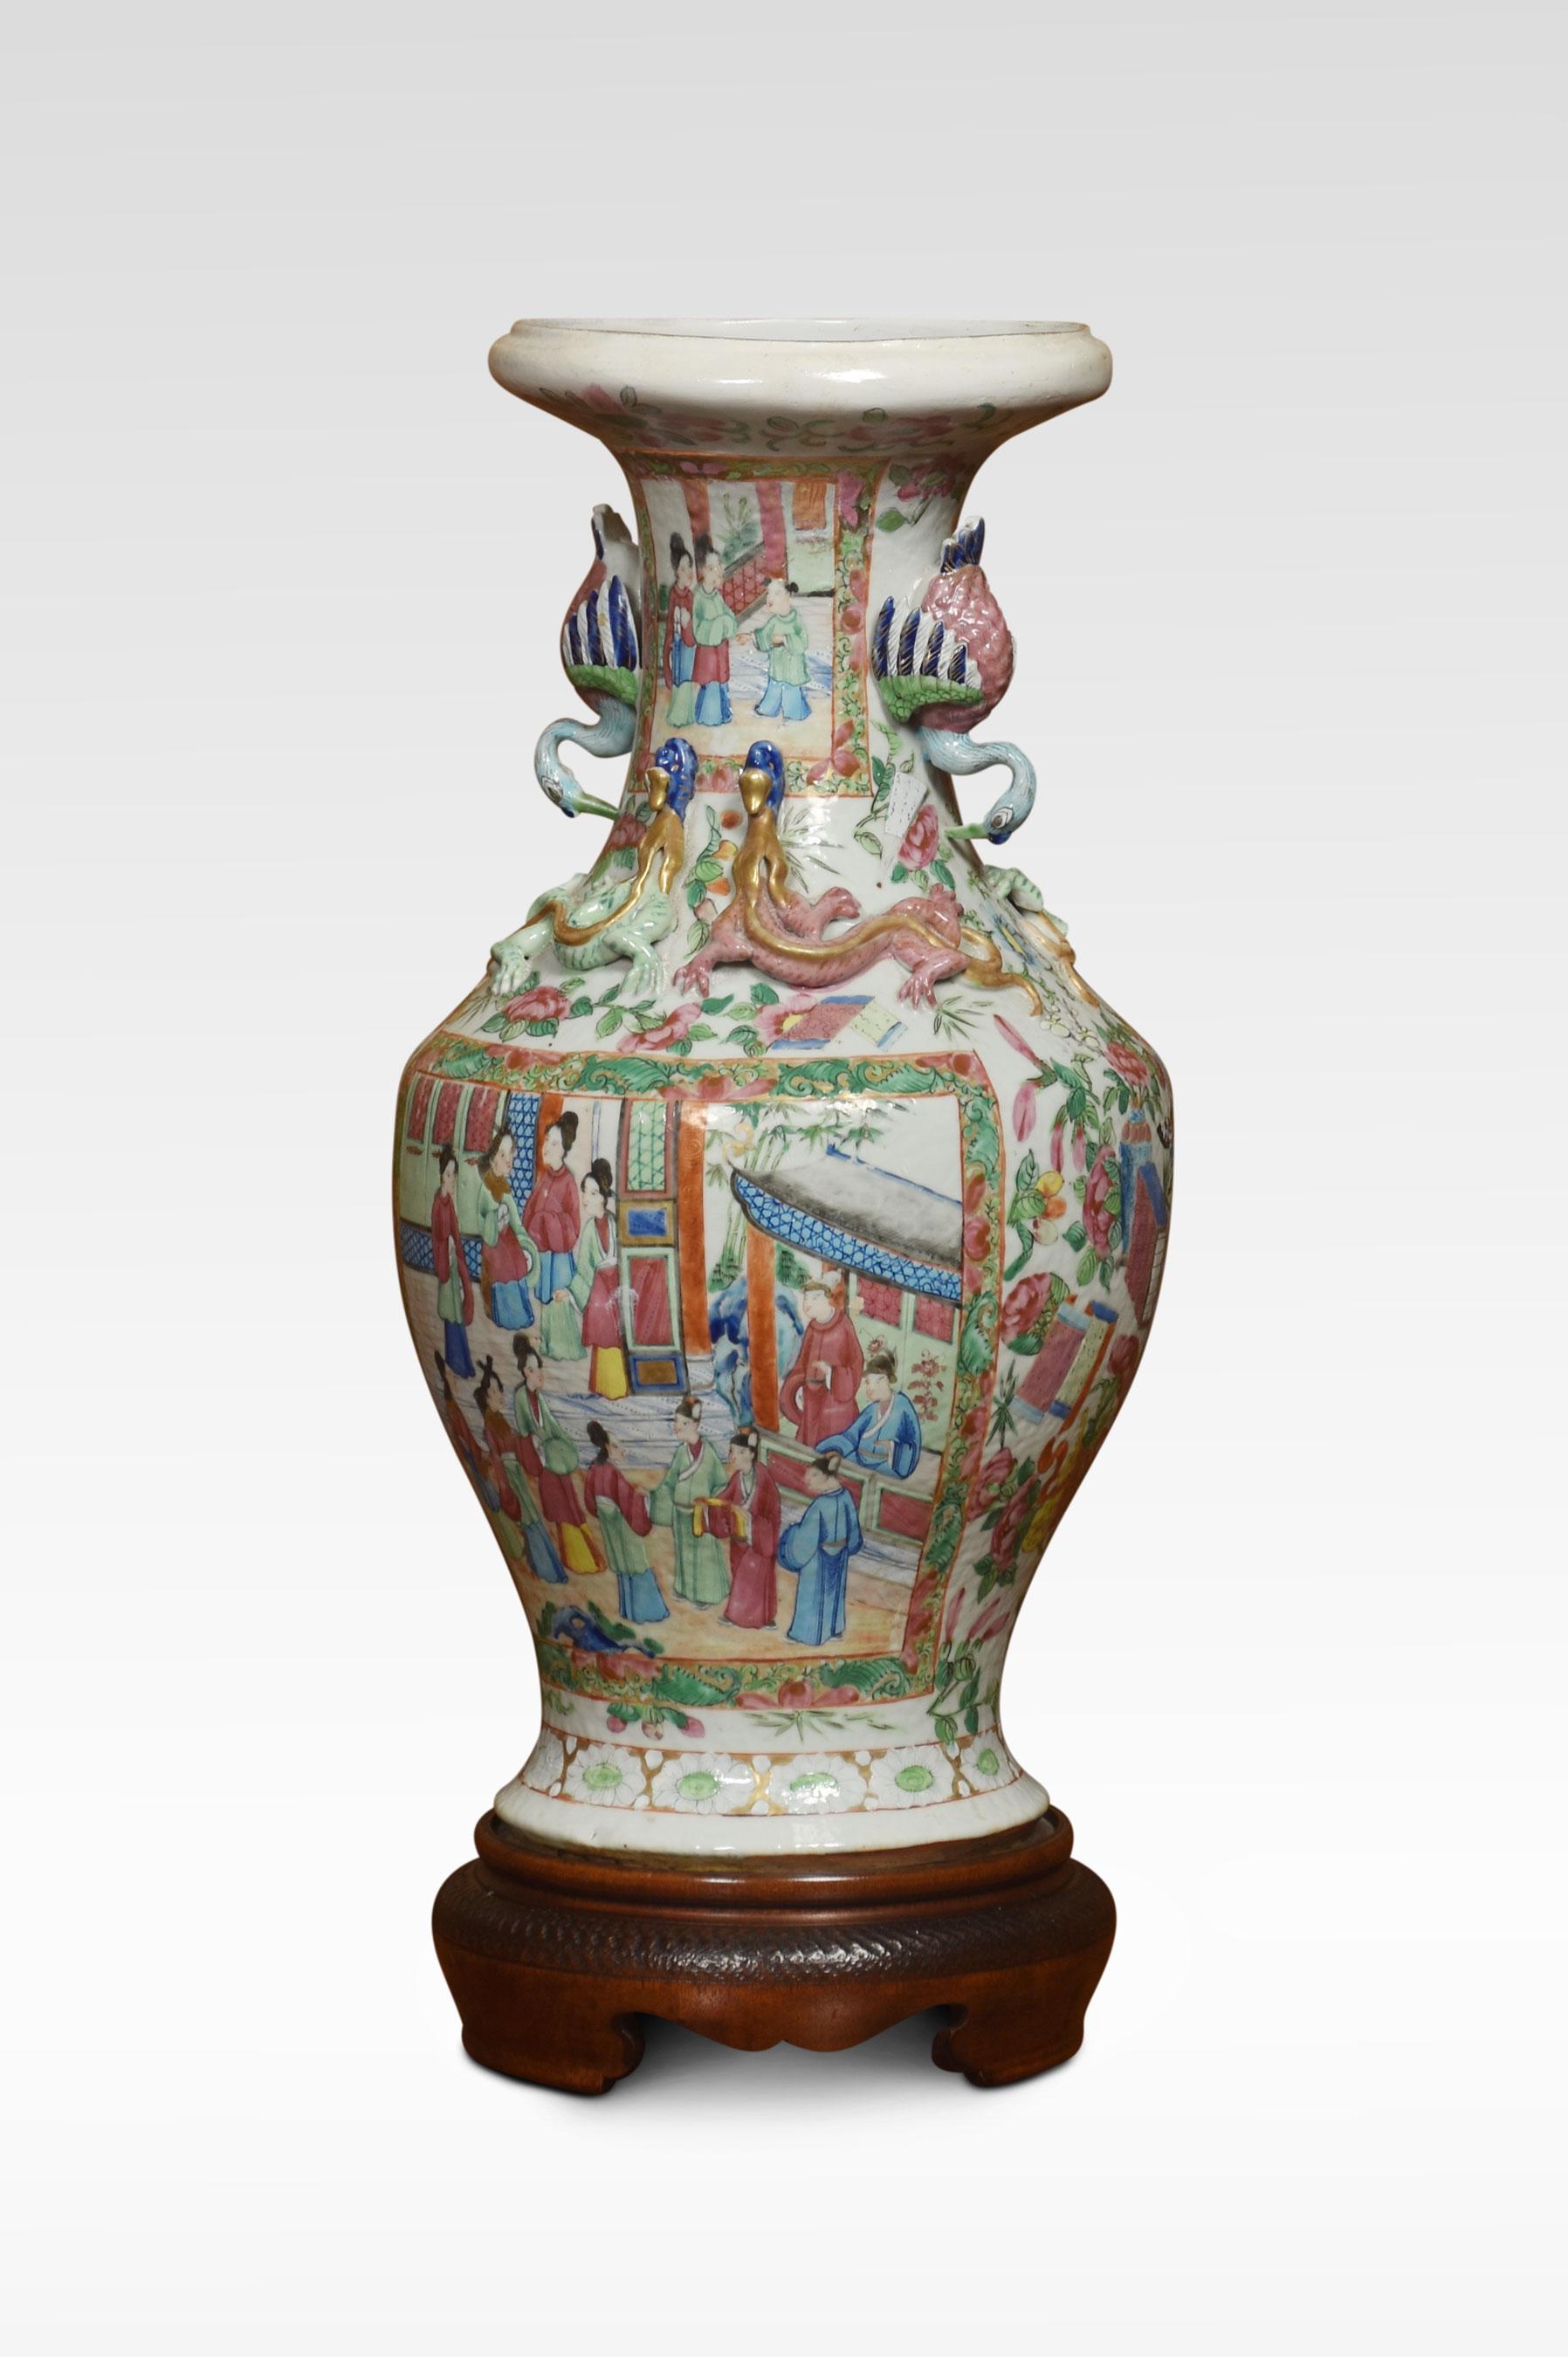 Cantonese twin-handled baluster vases, decorated in the famille rose palette with cartouche panels of figures, exotic birds and insects amongst the foliage. Raised up on a circular wooden base.
Dimensions
Height 19 Inches
Width 9 Inches
Depth 9